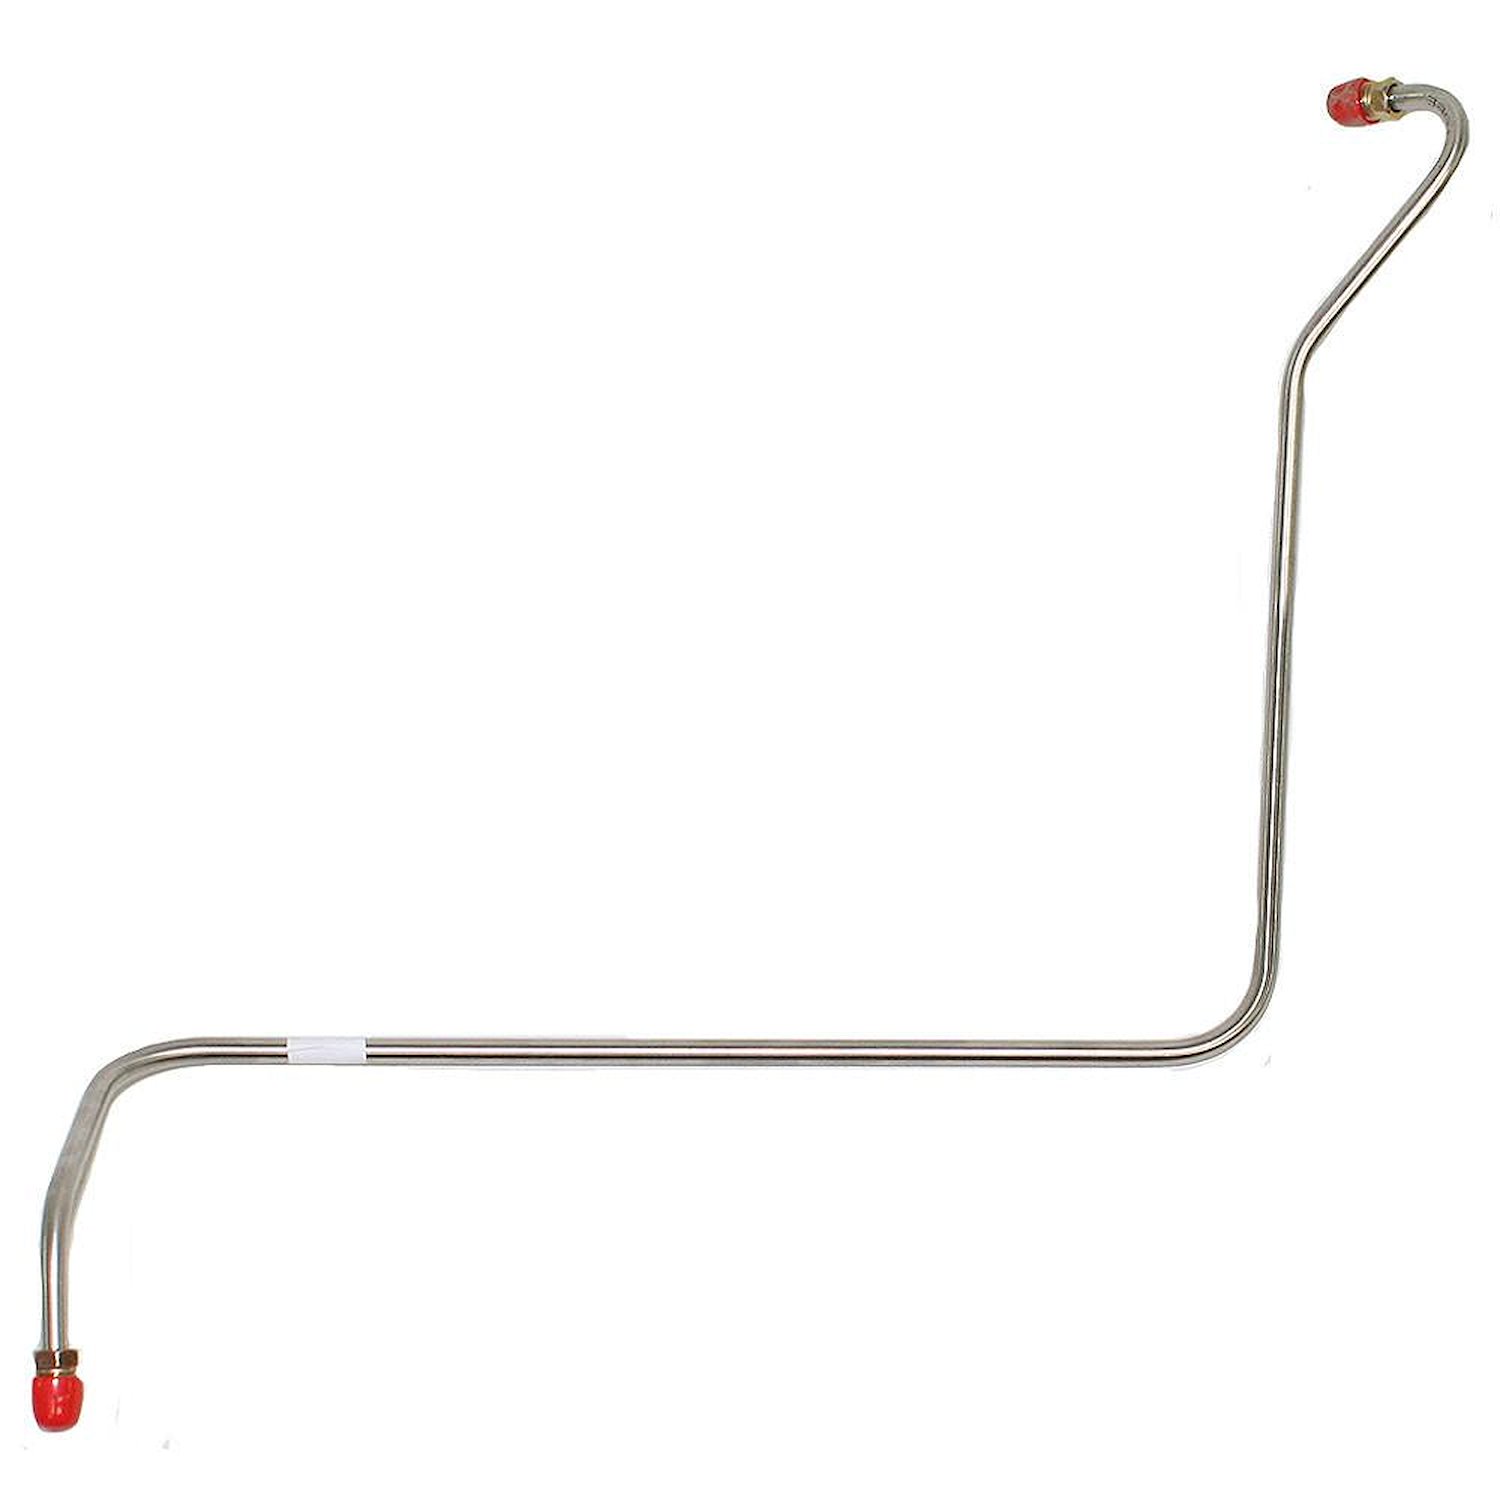 66 327 2 BBL - Fuel Pump to Carb. Line - Stainless